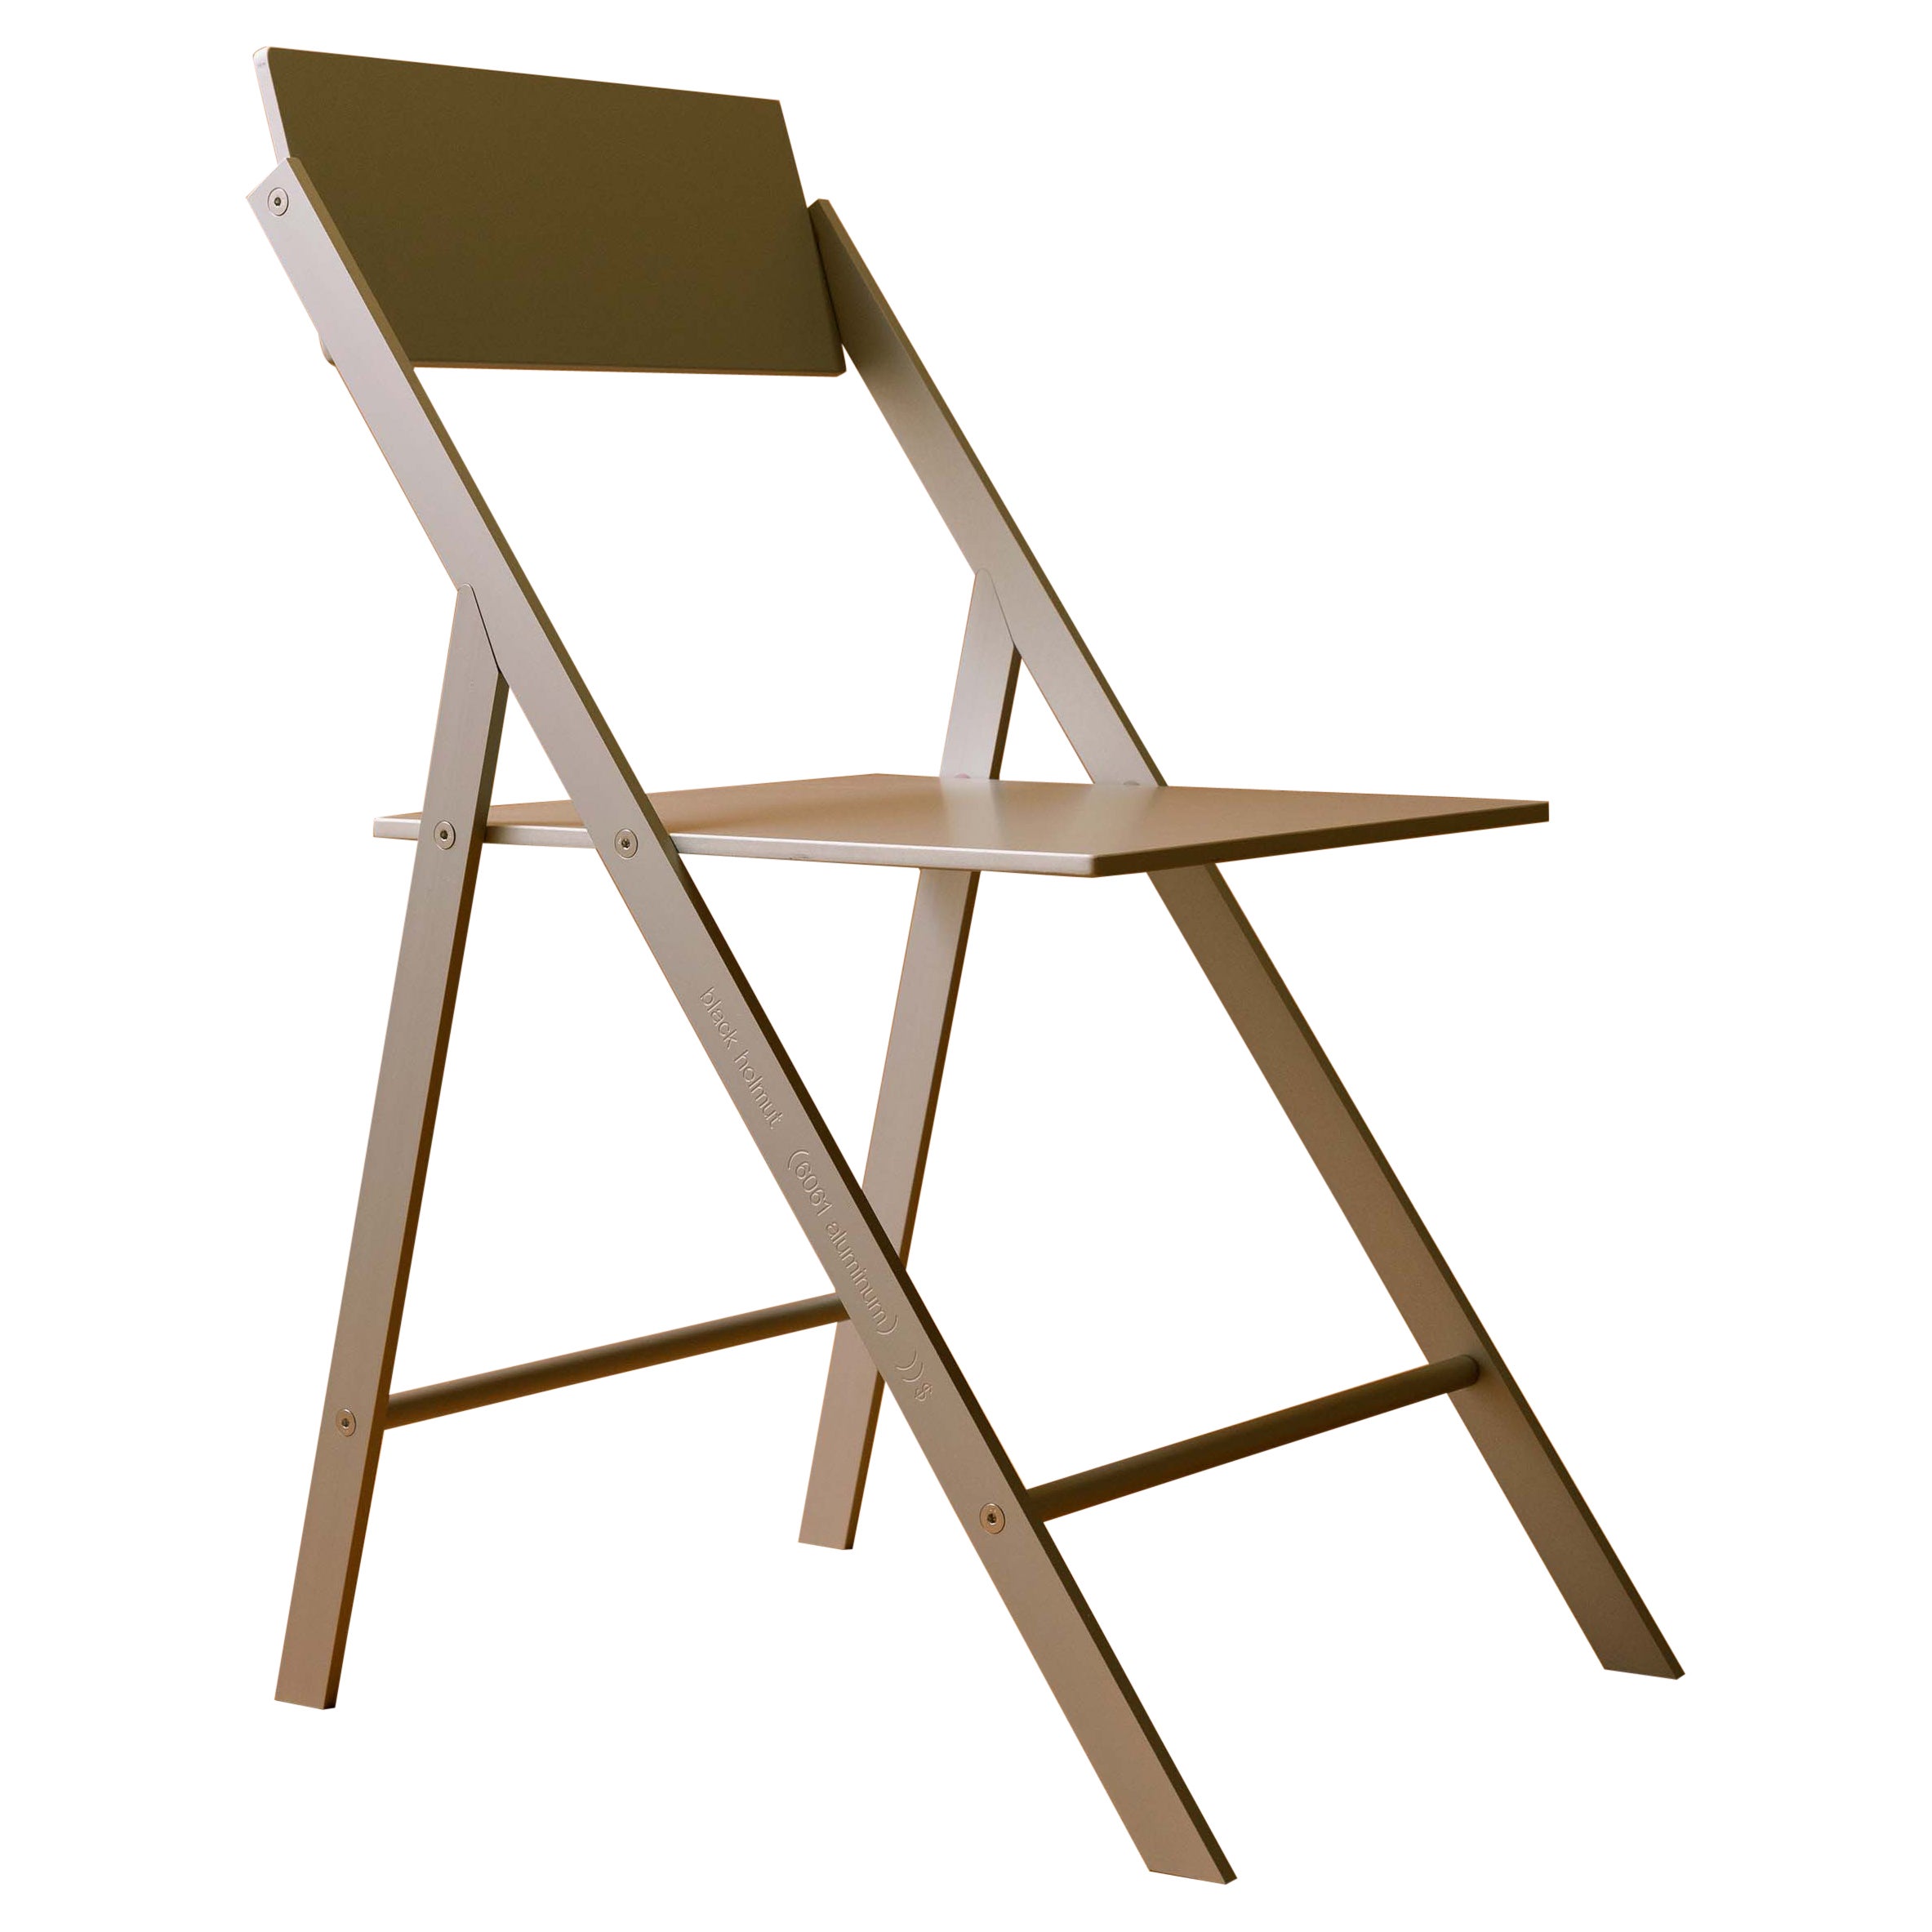 The Folding Chair in 6061 Aluminum 'Clear Finish'